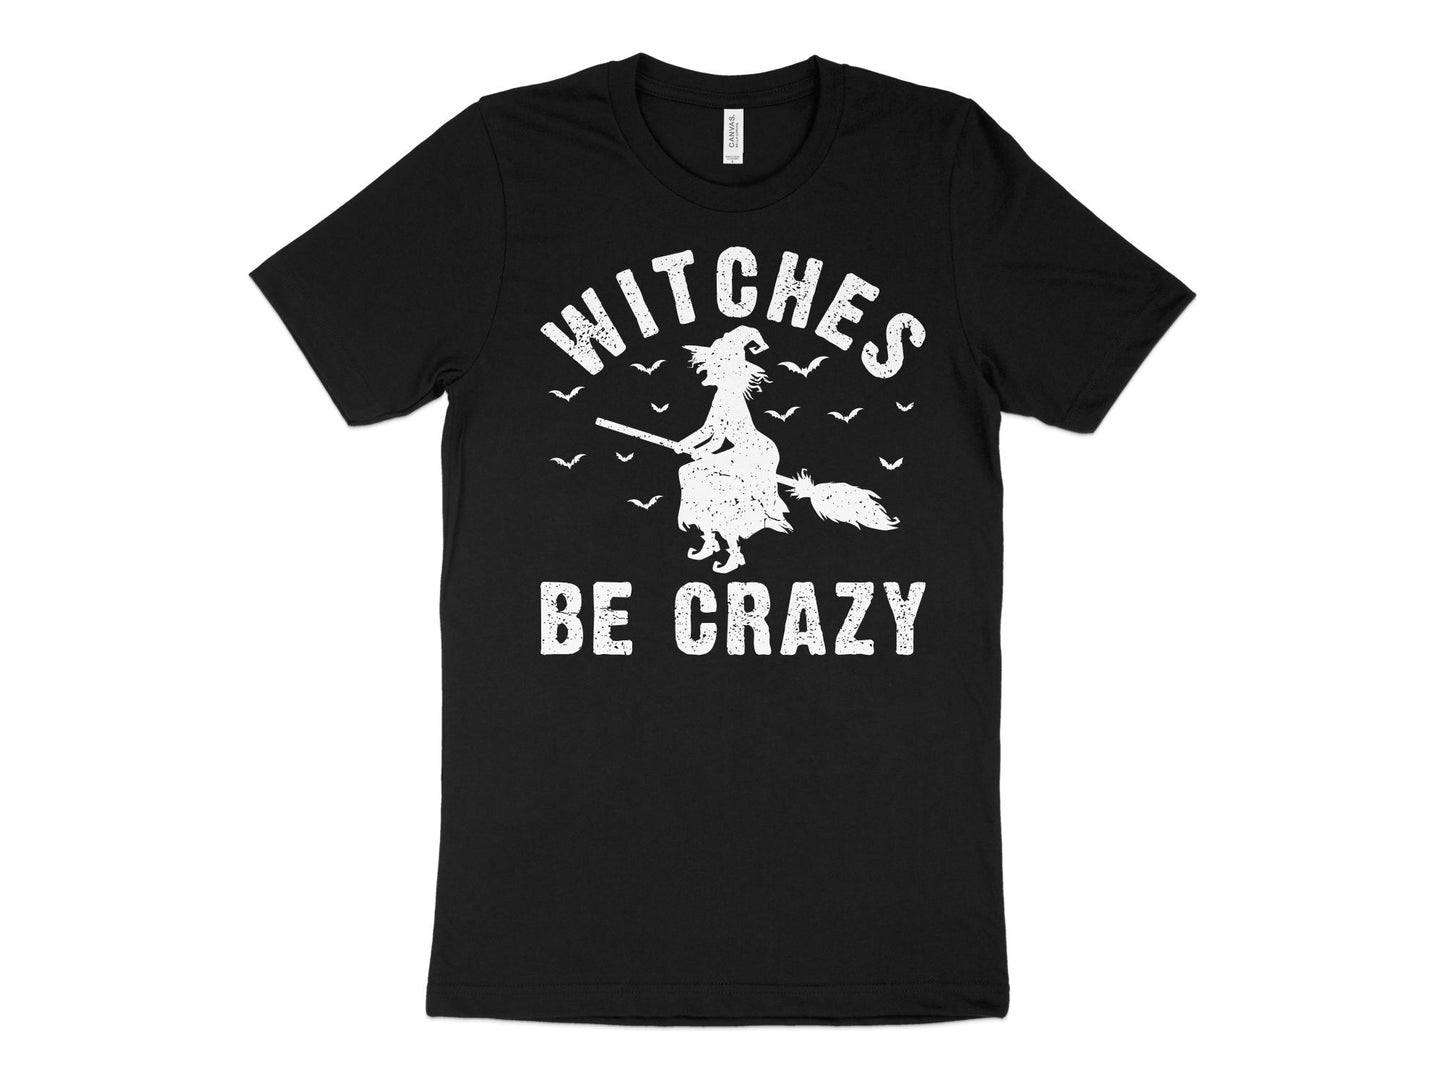 Witches Be Crazy Shirt, black